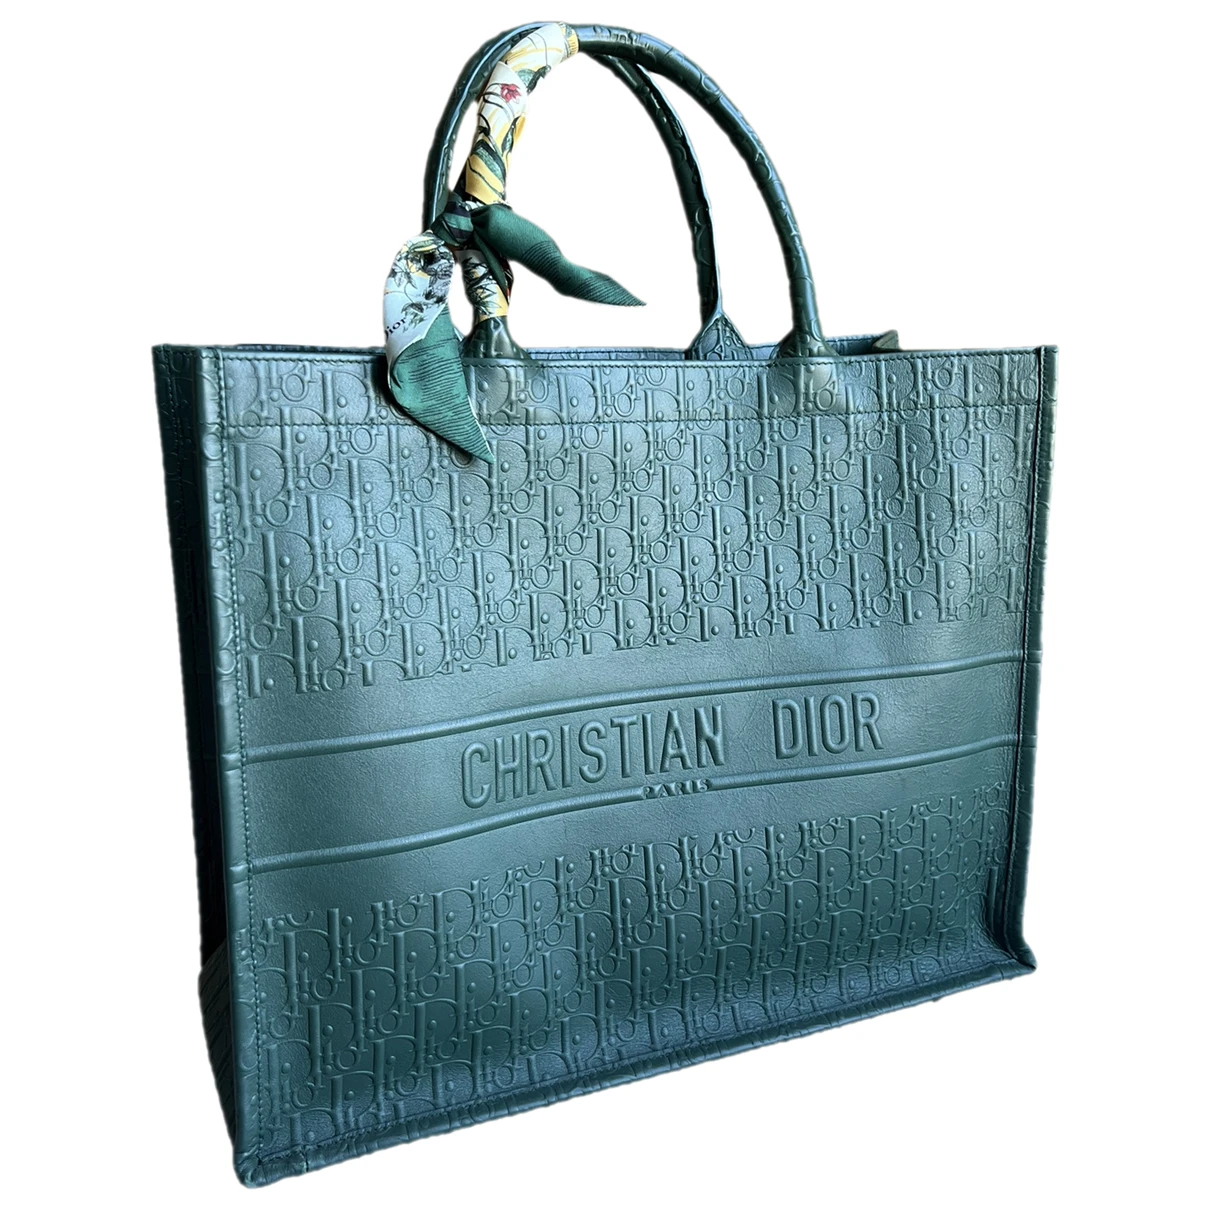 Pre-owned Dior Leather Tote In Green